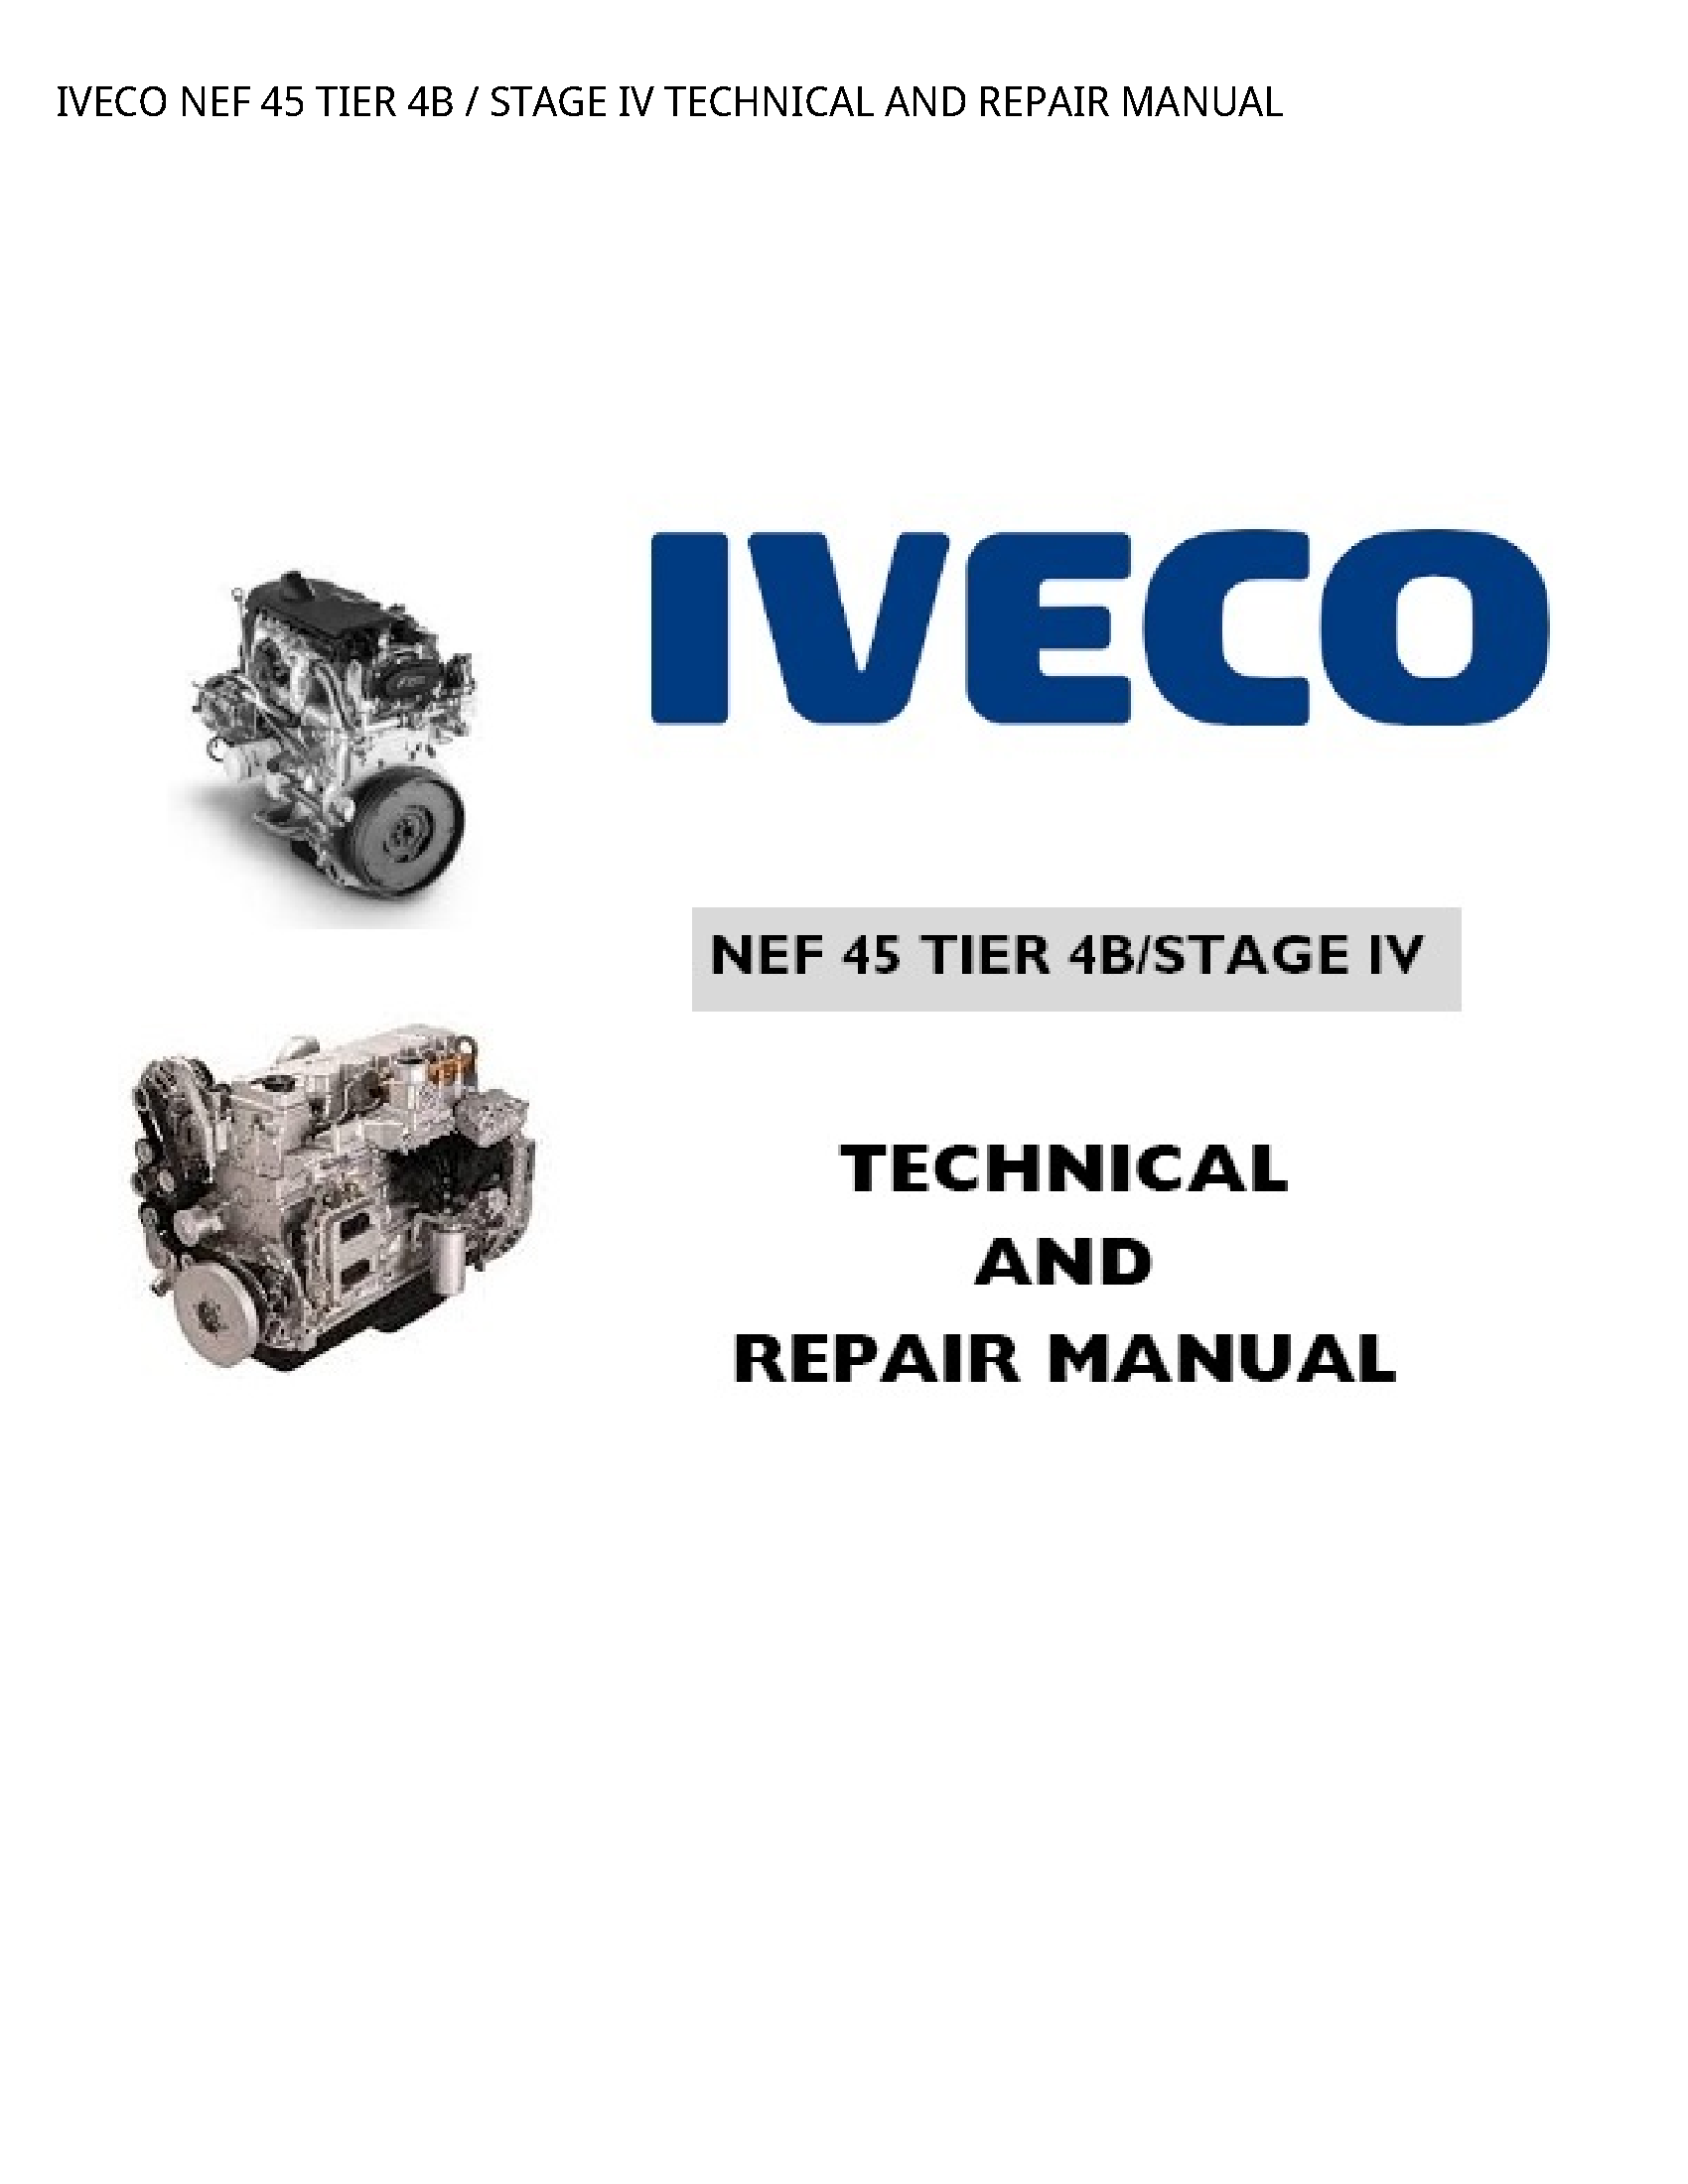 Iveco 45 NEF TIER STAGE IV TECHNICAL AND REPAIR manual